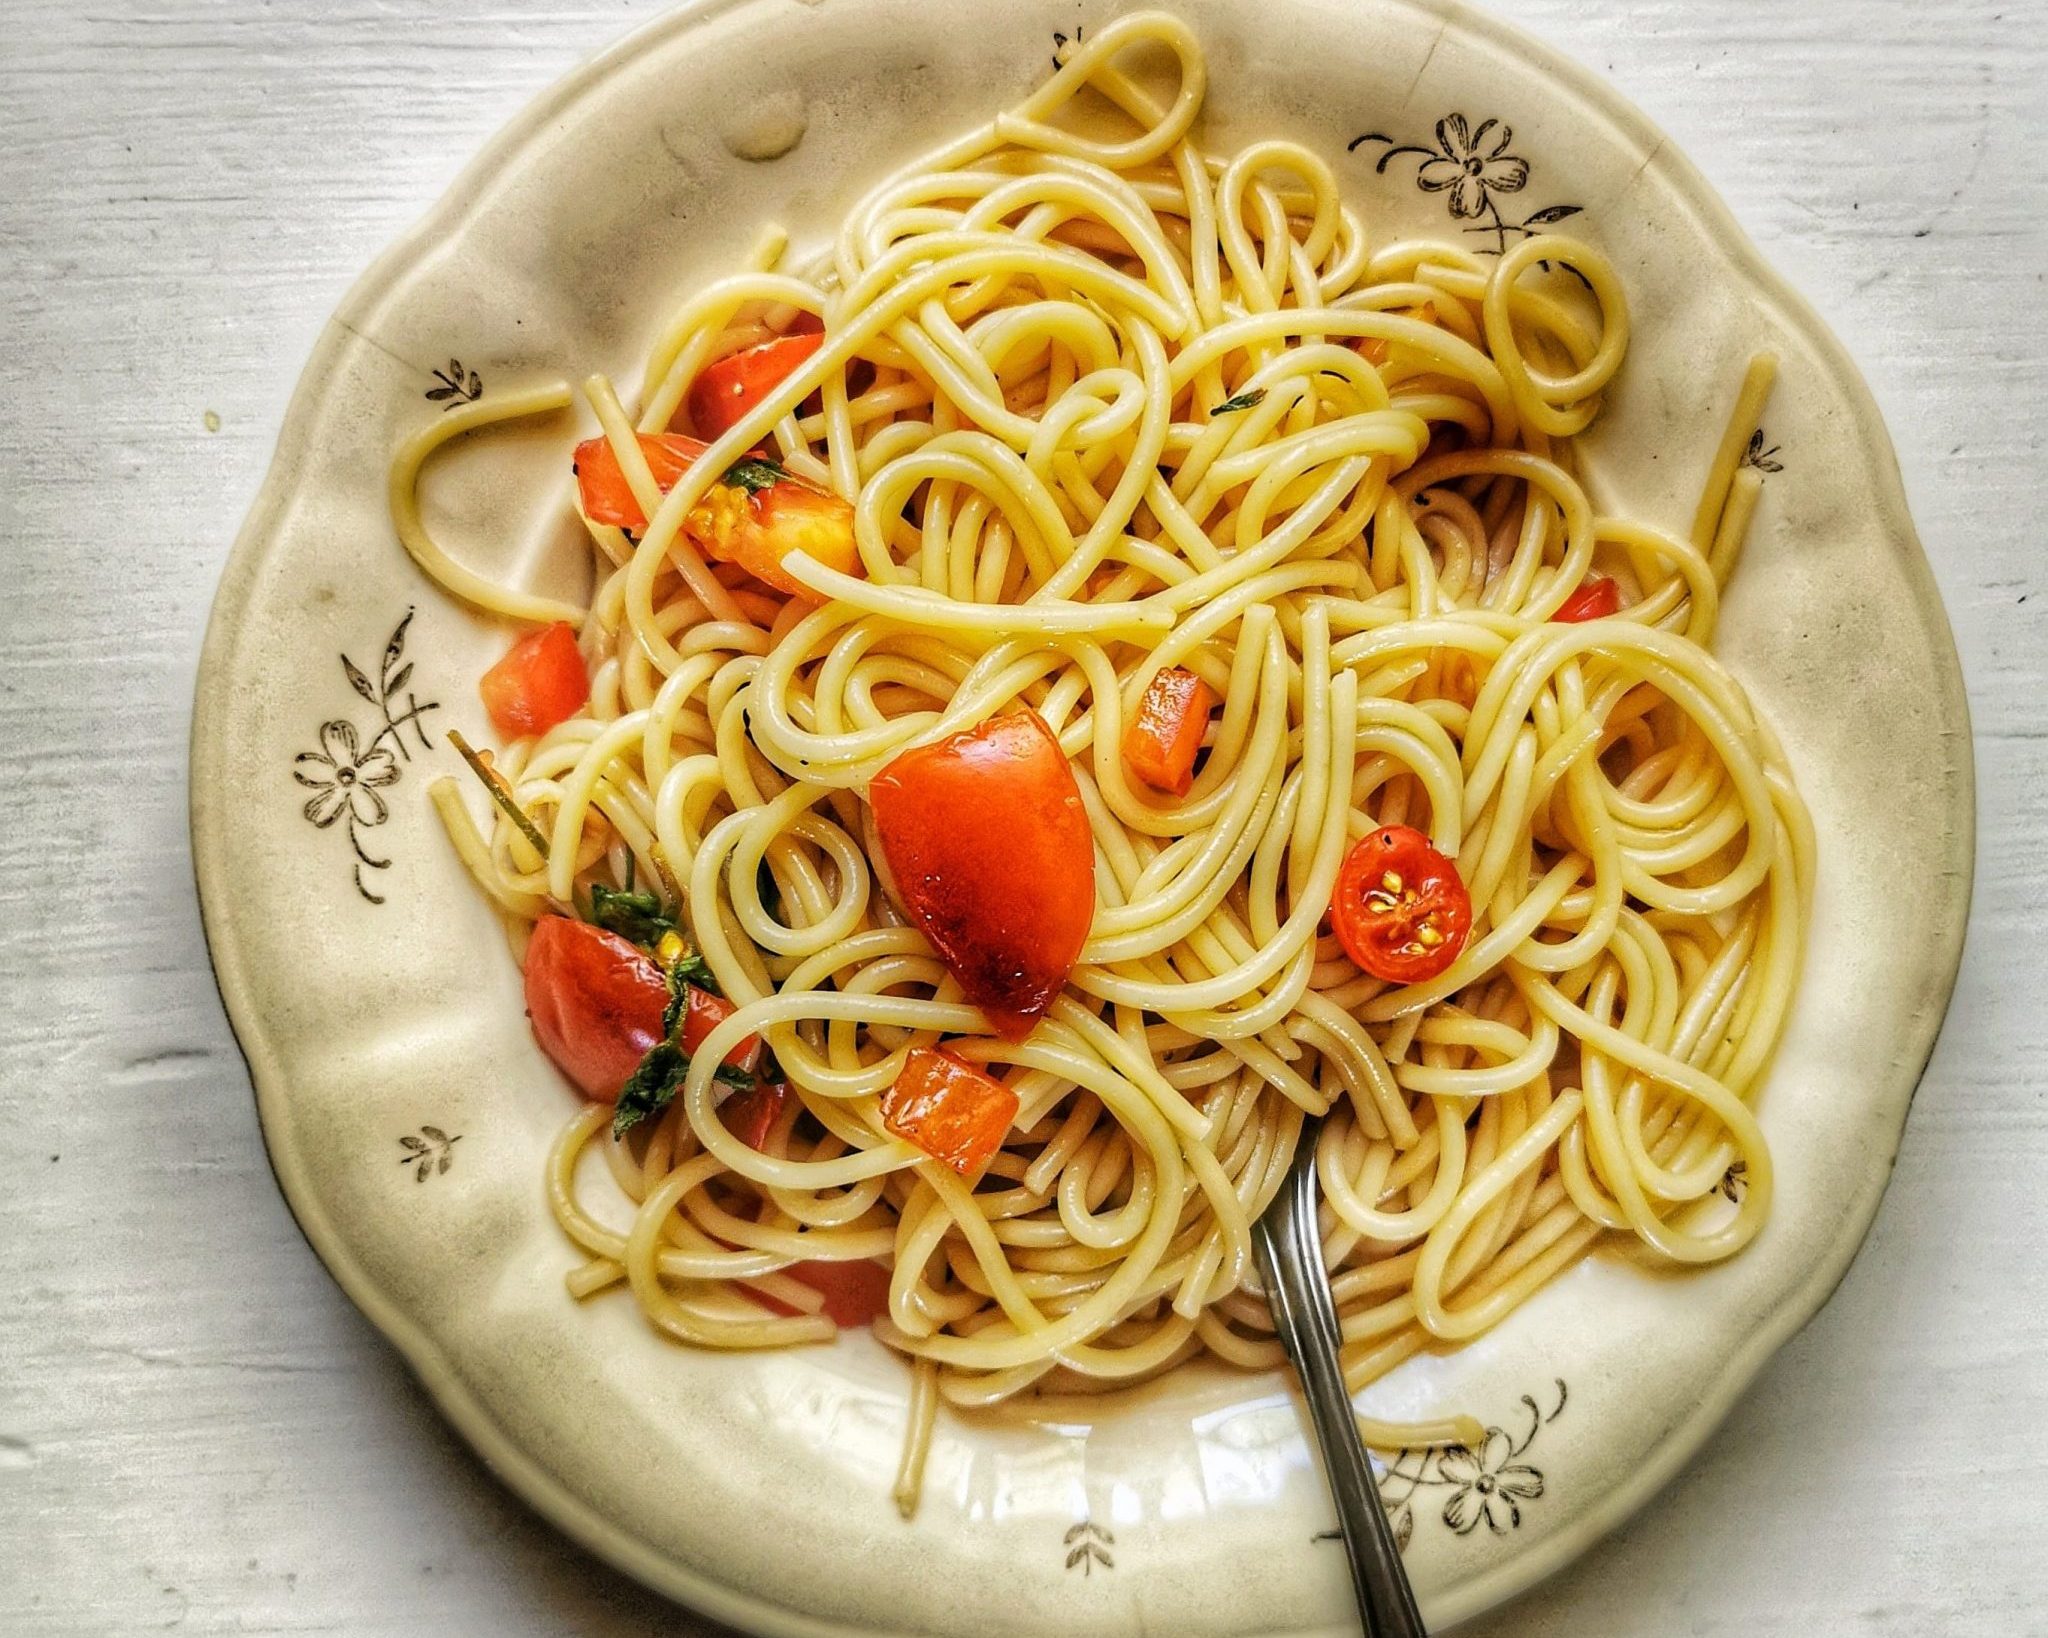 Summer tomato recipes - Plate of spaghetti with cherry tomatoes